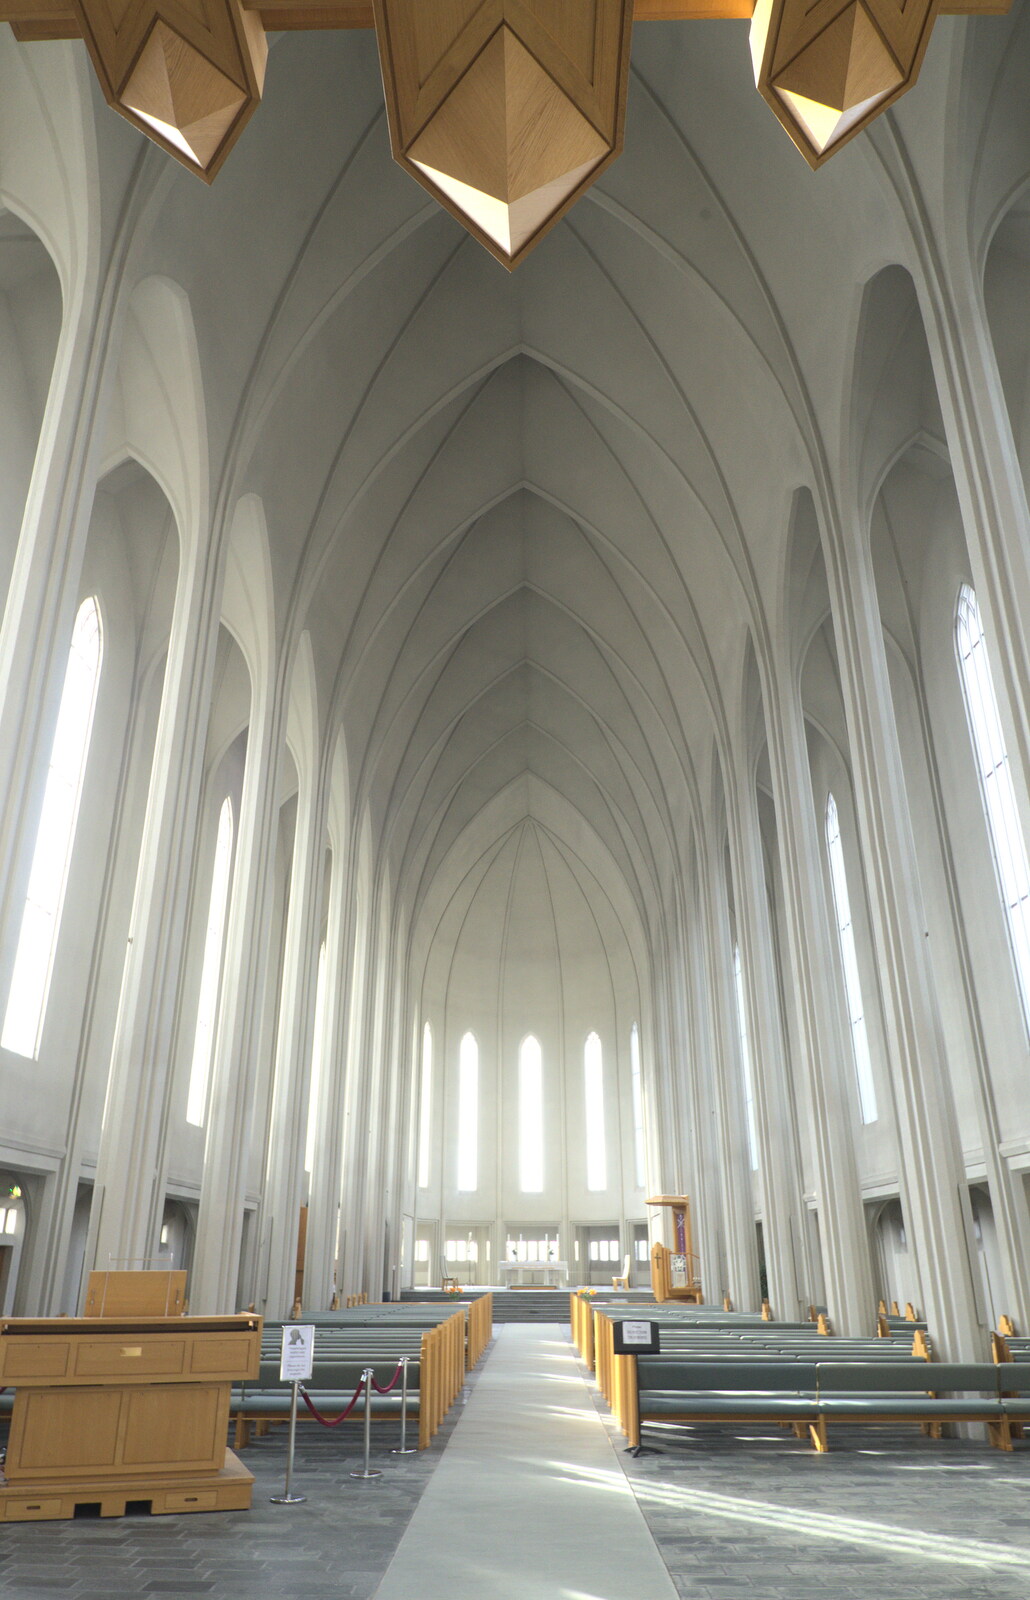 The epic and airy nave of Hallgrímskirkja from Hallgrímskirkja Cathedral and Whale Watching, Reykjavik - 21st April 2017